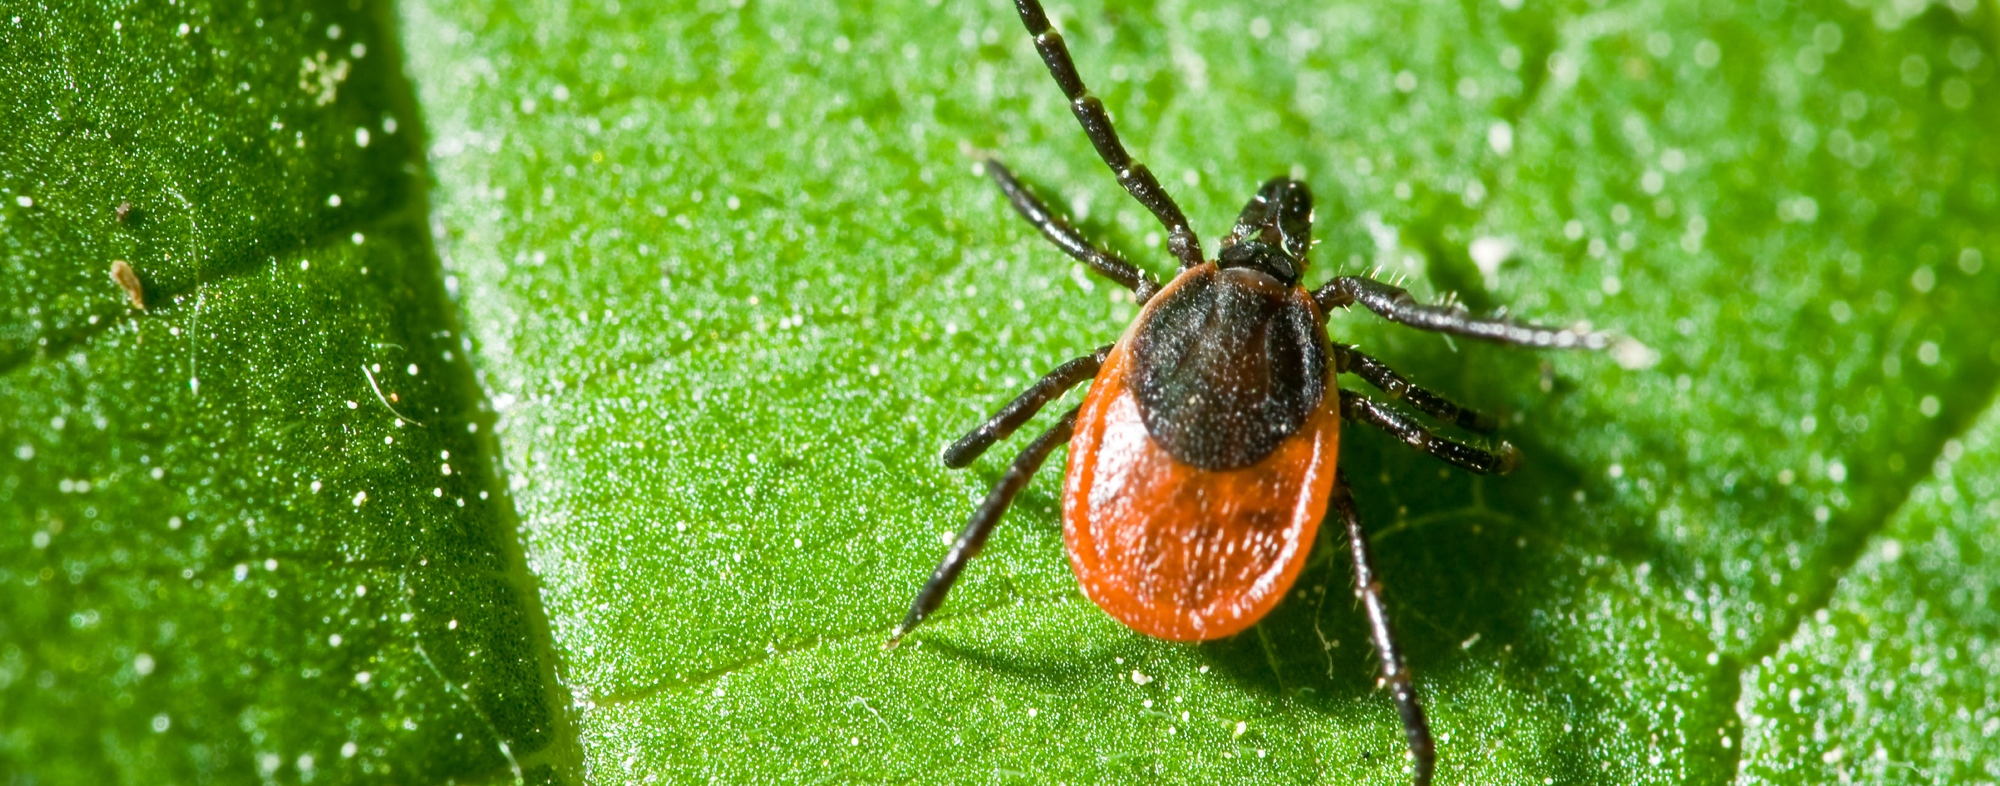 Delicately remove a tick, as if it were walking on a dripping wet leaf